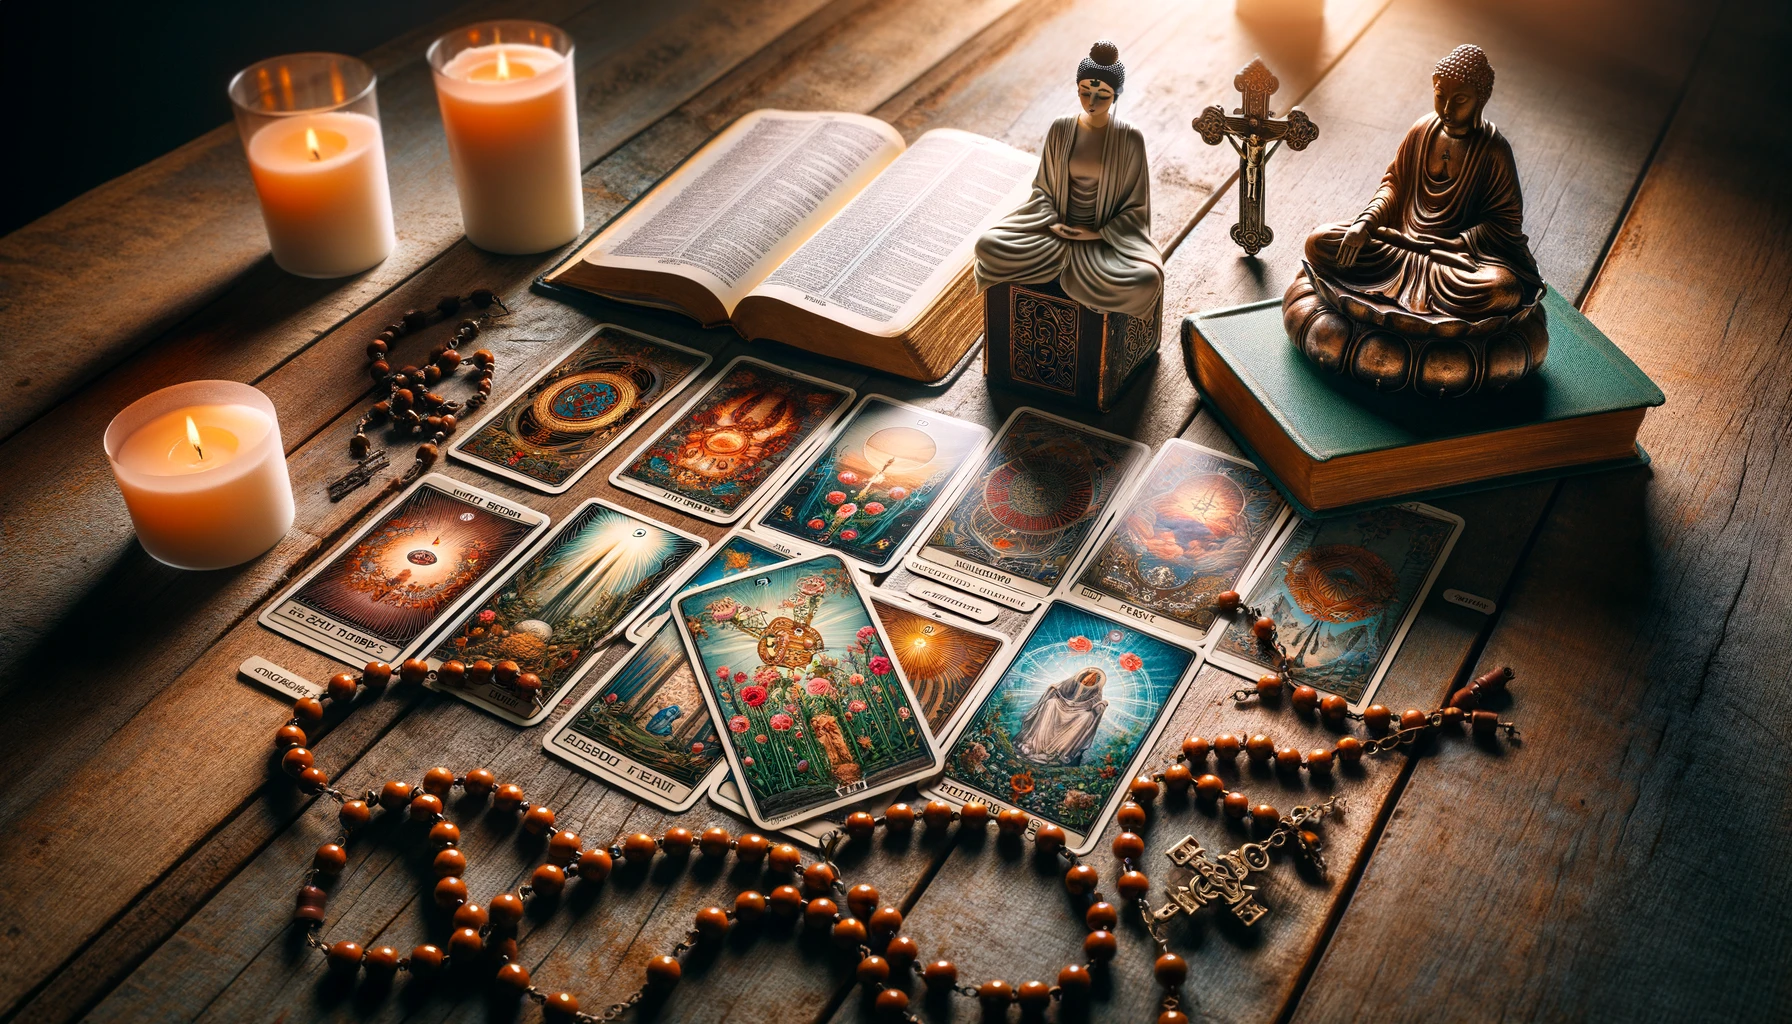 A serene Tarot card spread is displayed on a rustic wooden table creating a setting that blends spirituality and tradition. The cards are laid out in